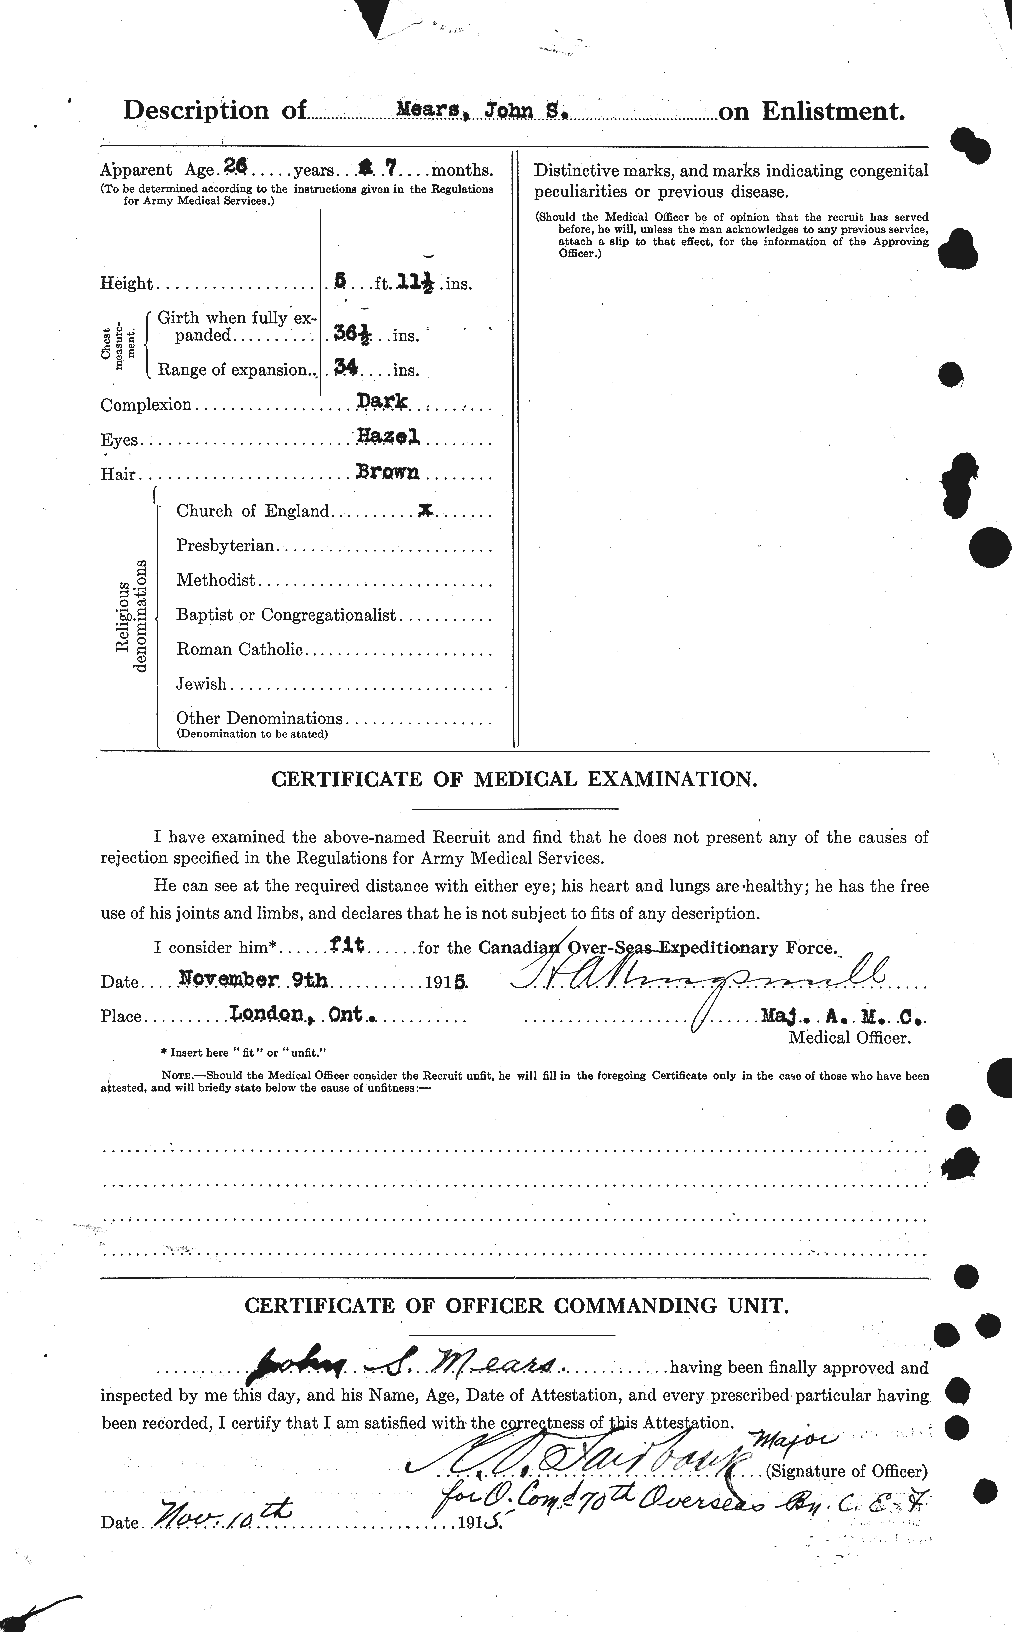 Personnel Records of the First World War - CEF 489702b